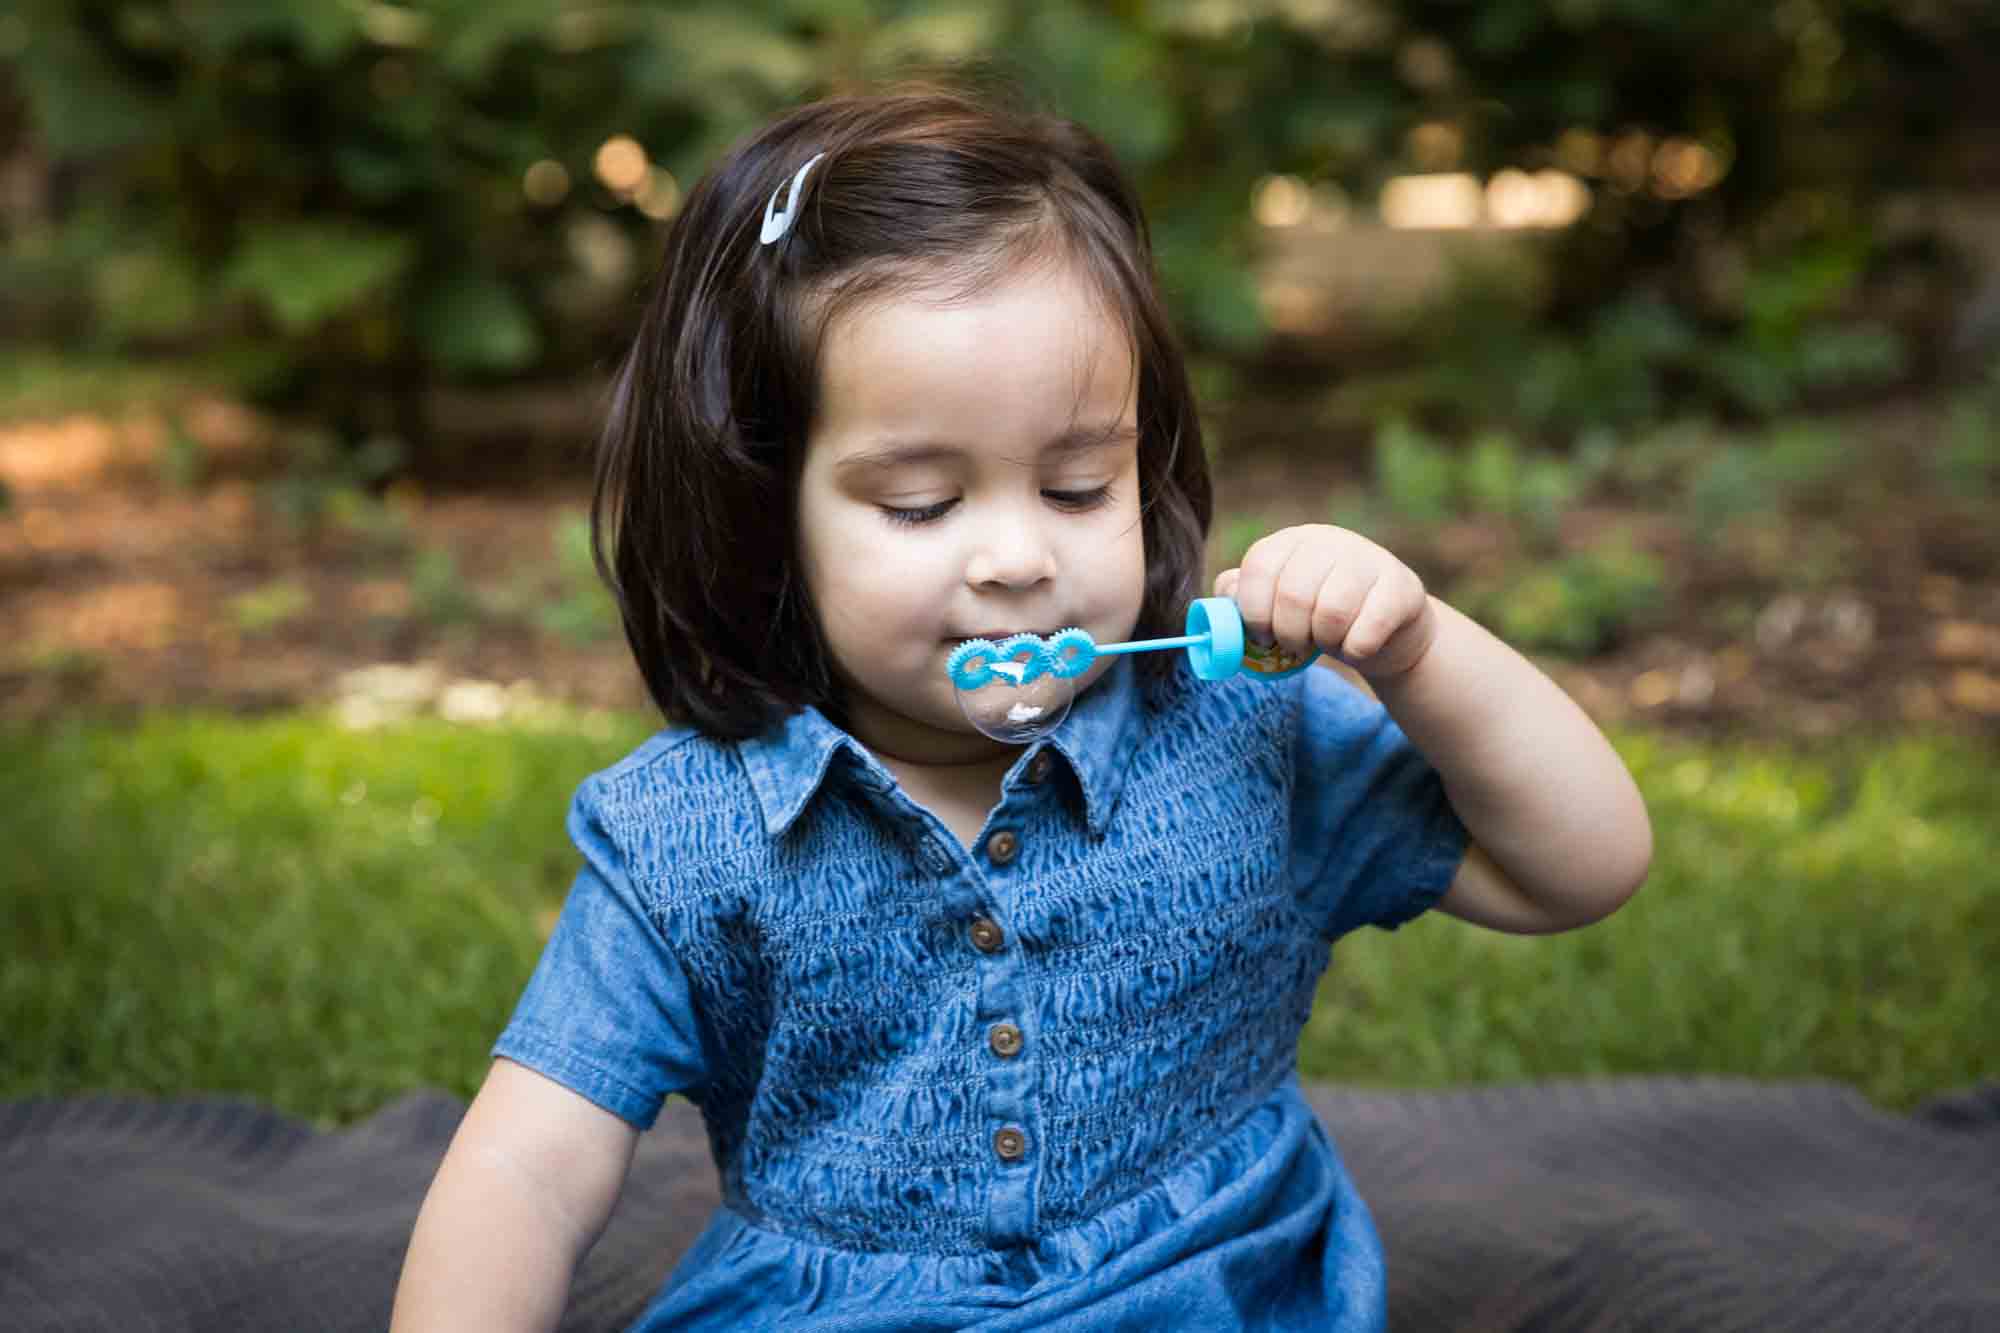 Little girl in blue dress blowing bubbles in grass during a Brooklyn Commons family portrait session